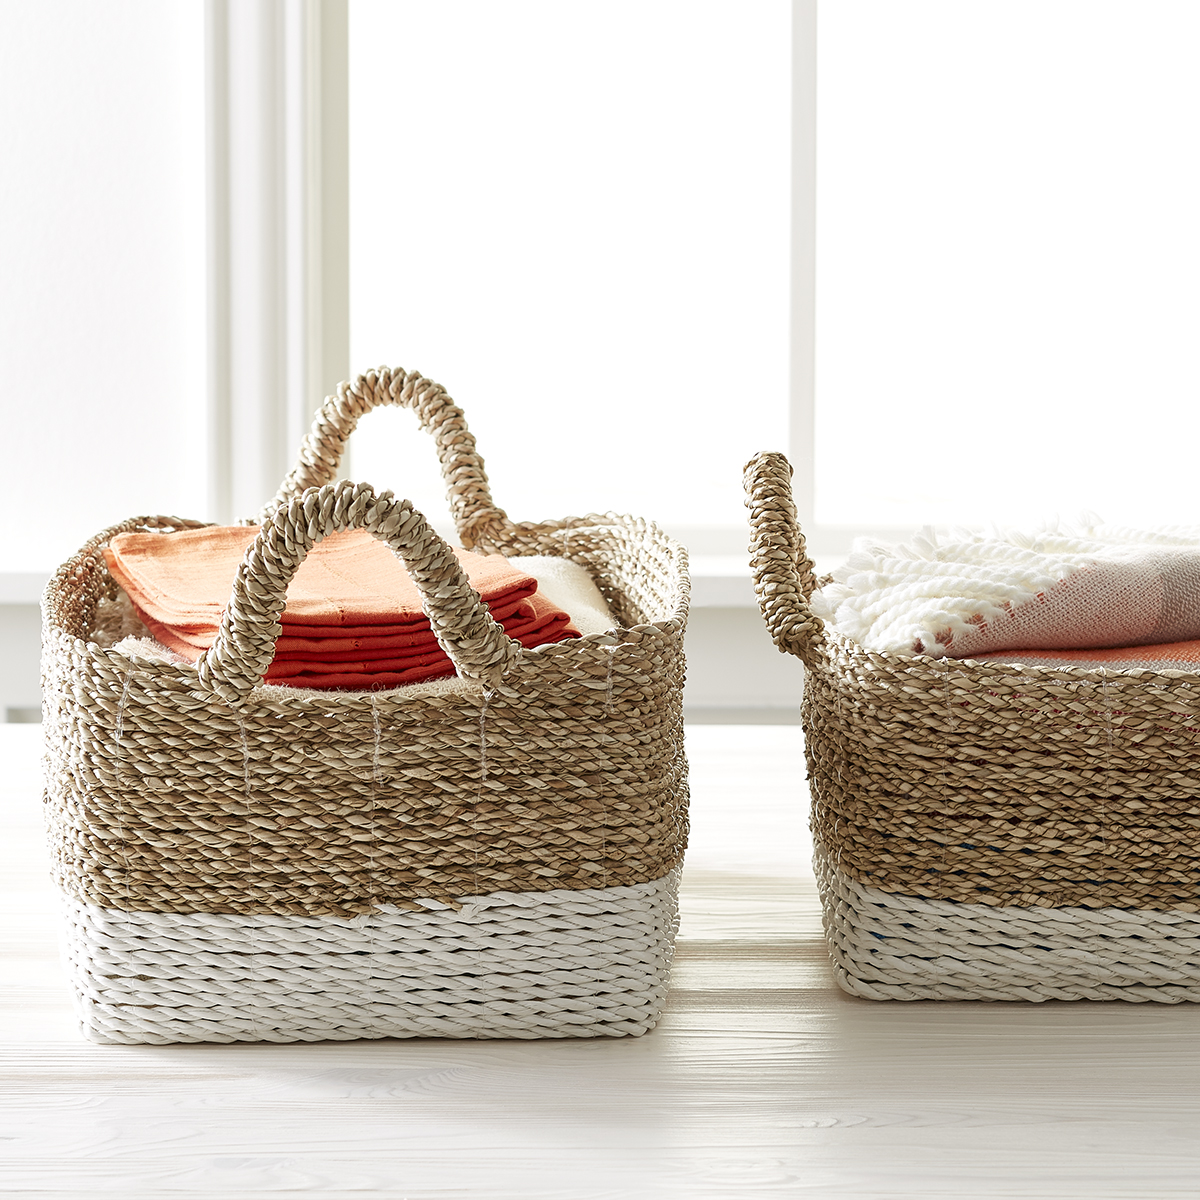 Round White Wicker Lined Basket With Handles ~ Beautiful Home Storage Basket 